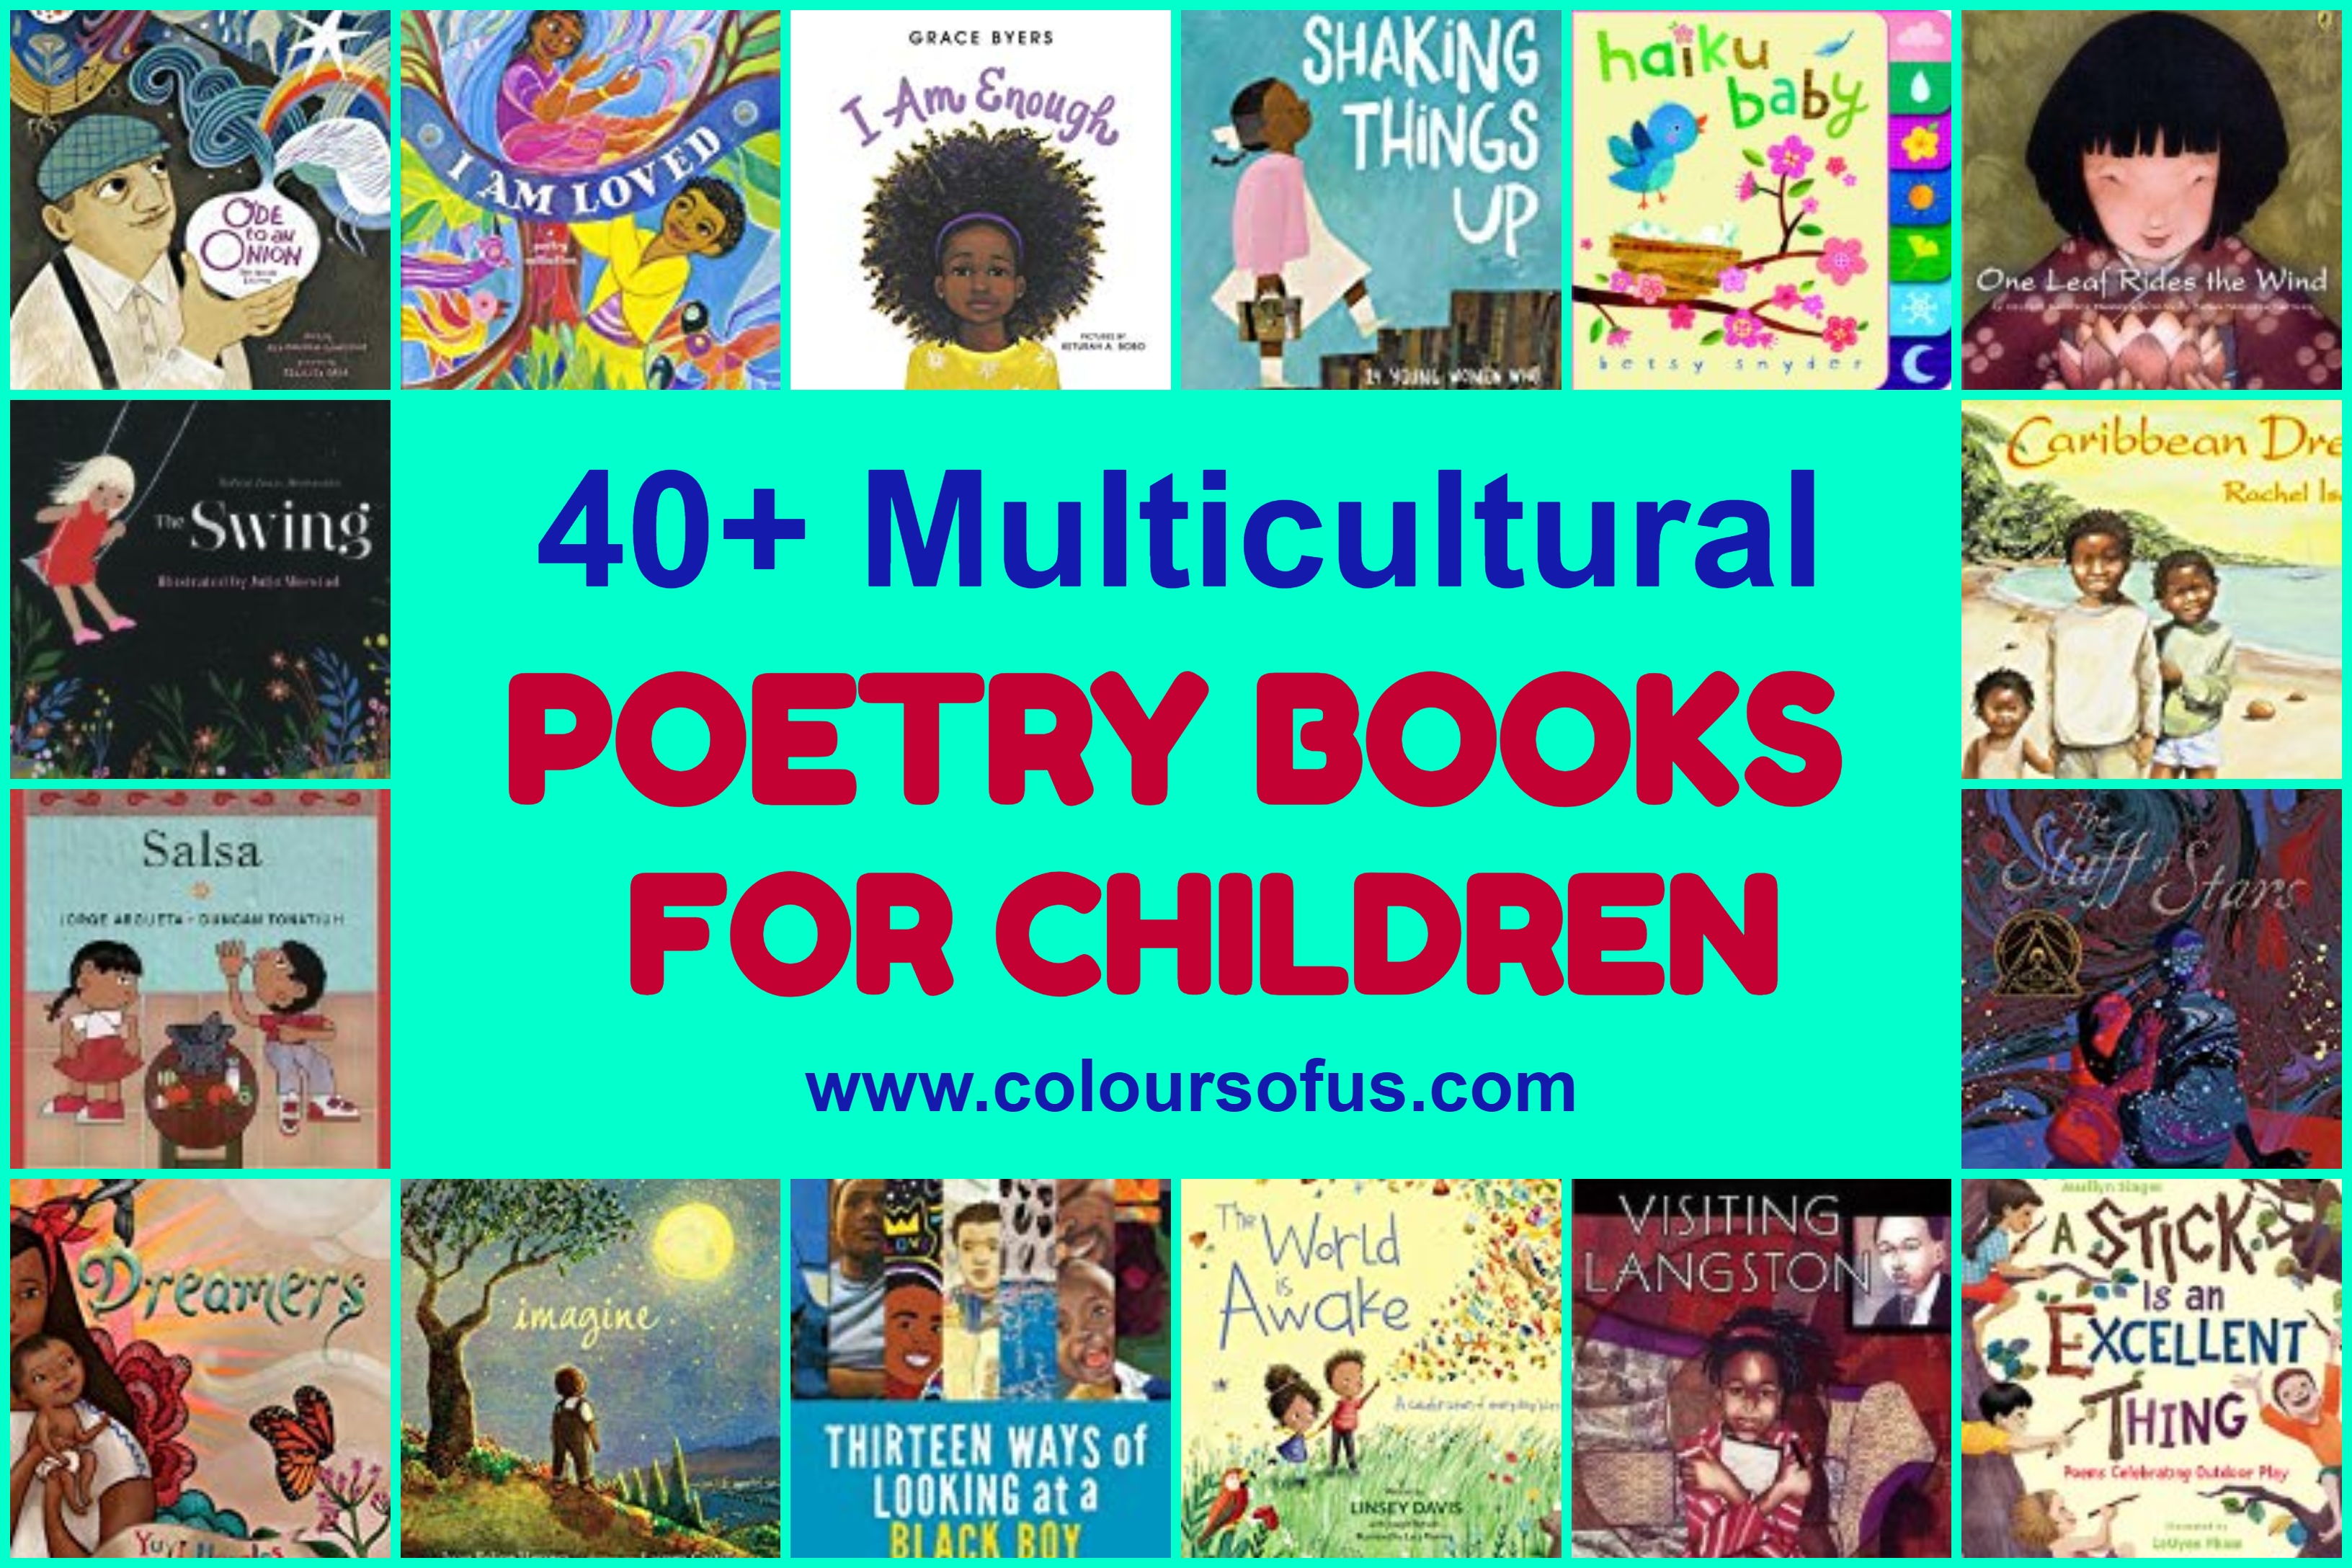 40+ Multicultural Poetry Books for Children